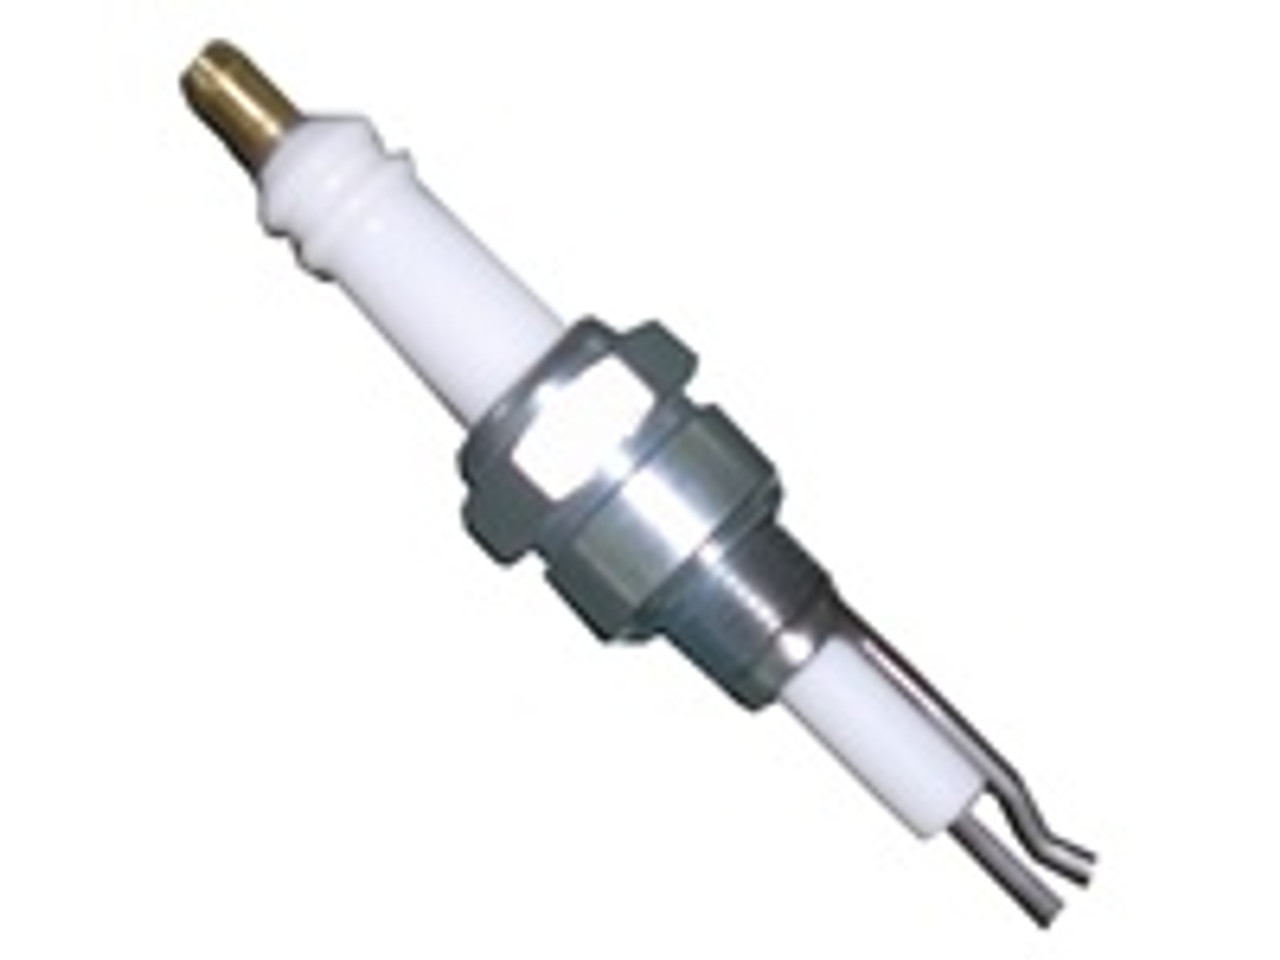 New ECLIPSE 13047 GAS IGNITOR